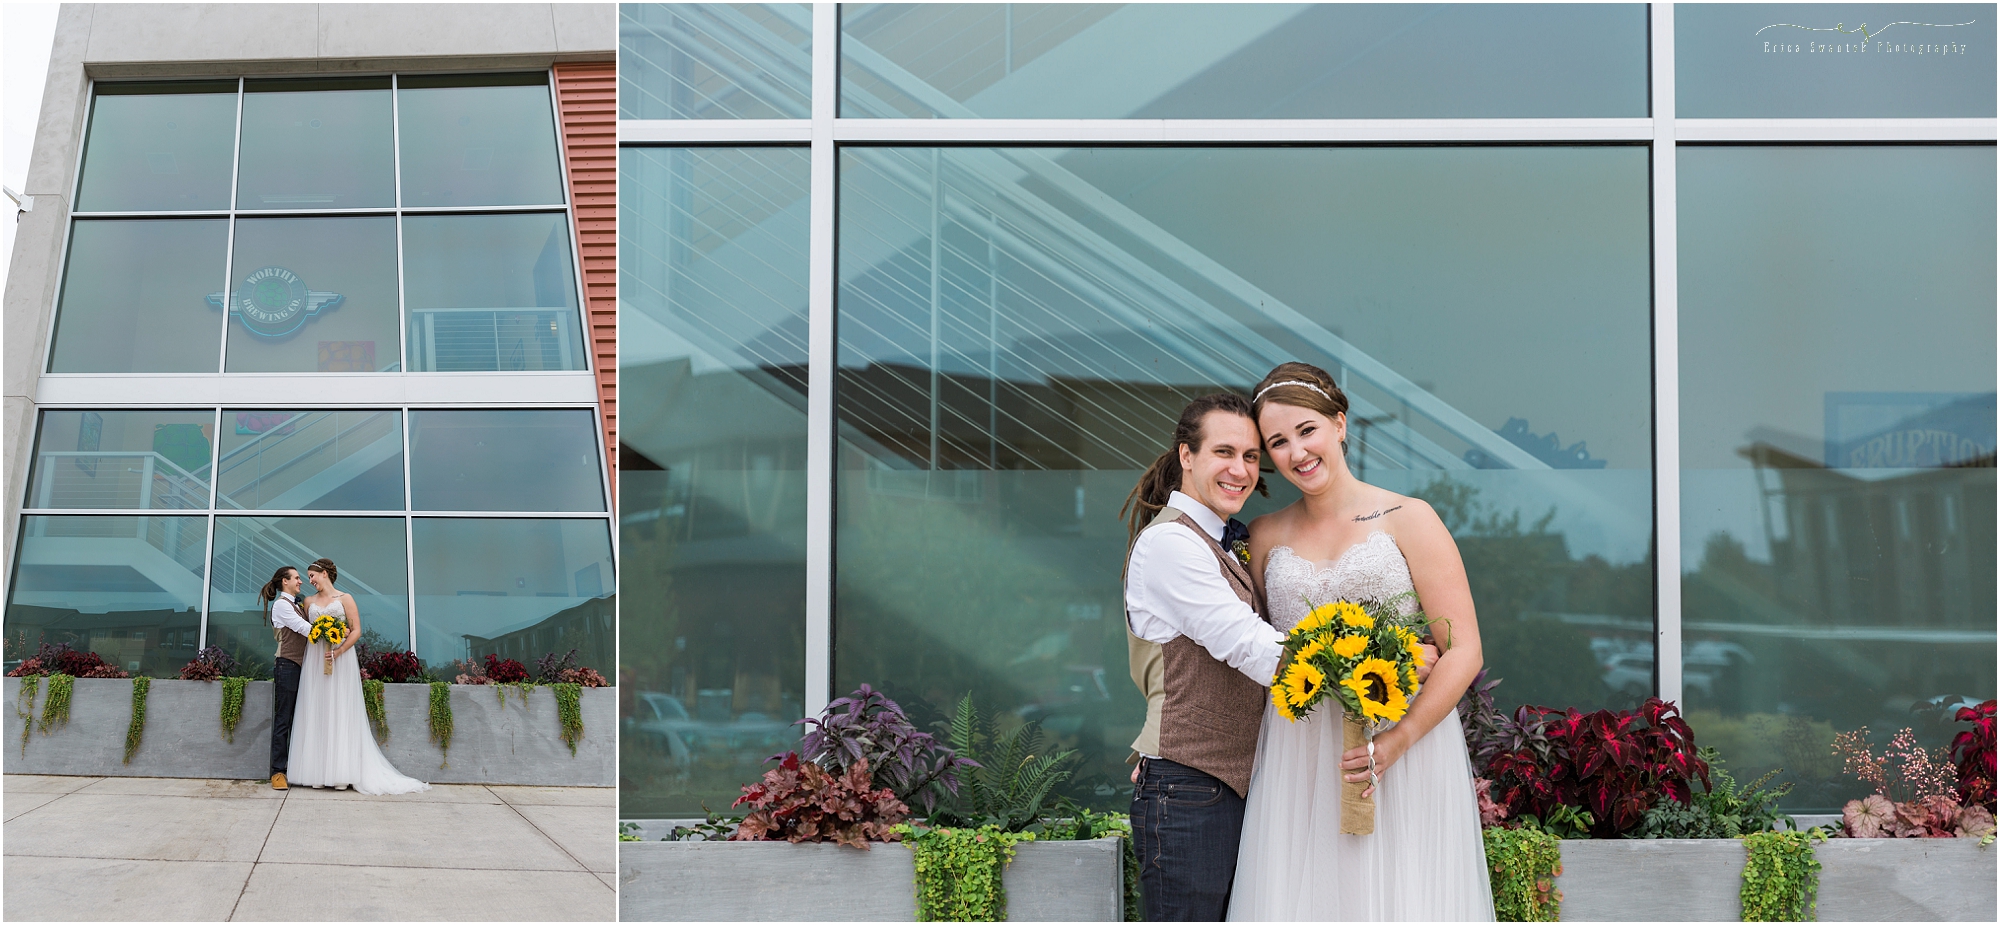 The bride and groom pose with her sunflower bouquet in front of the main entrance for their Worthy Brewing Wedding in Bend Oregon. | Erica Swantek Photography